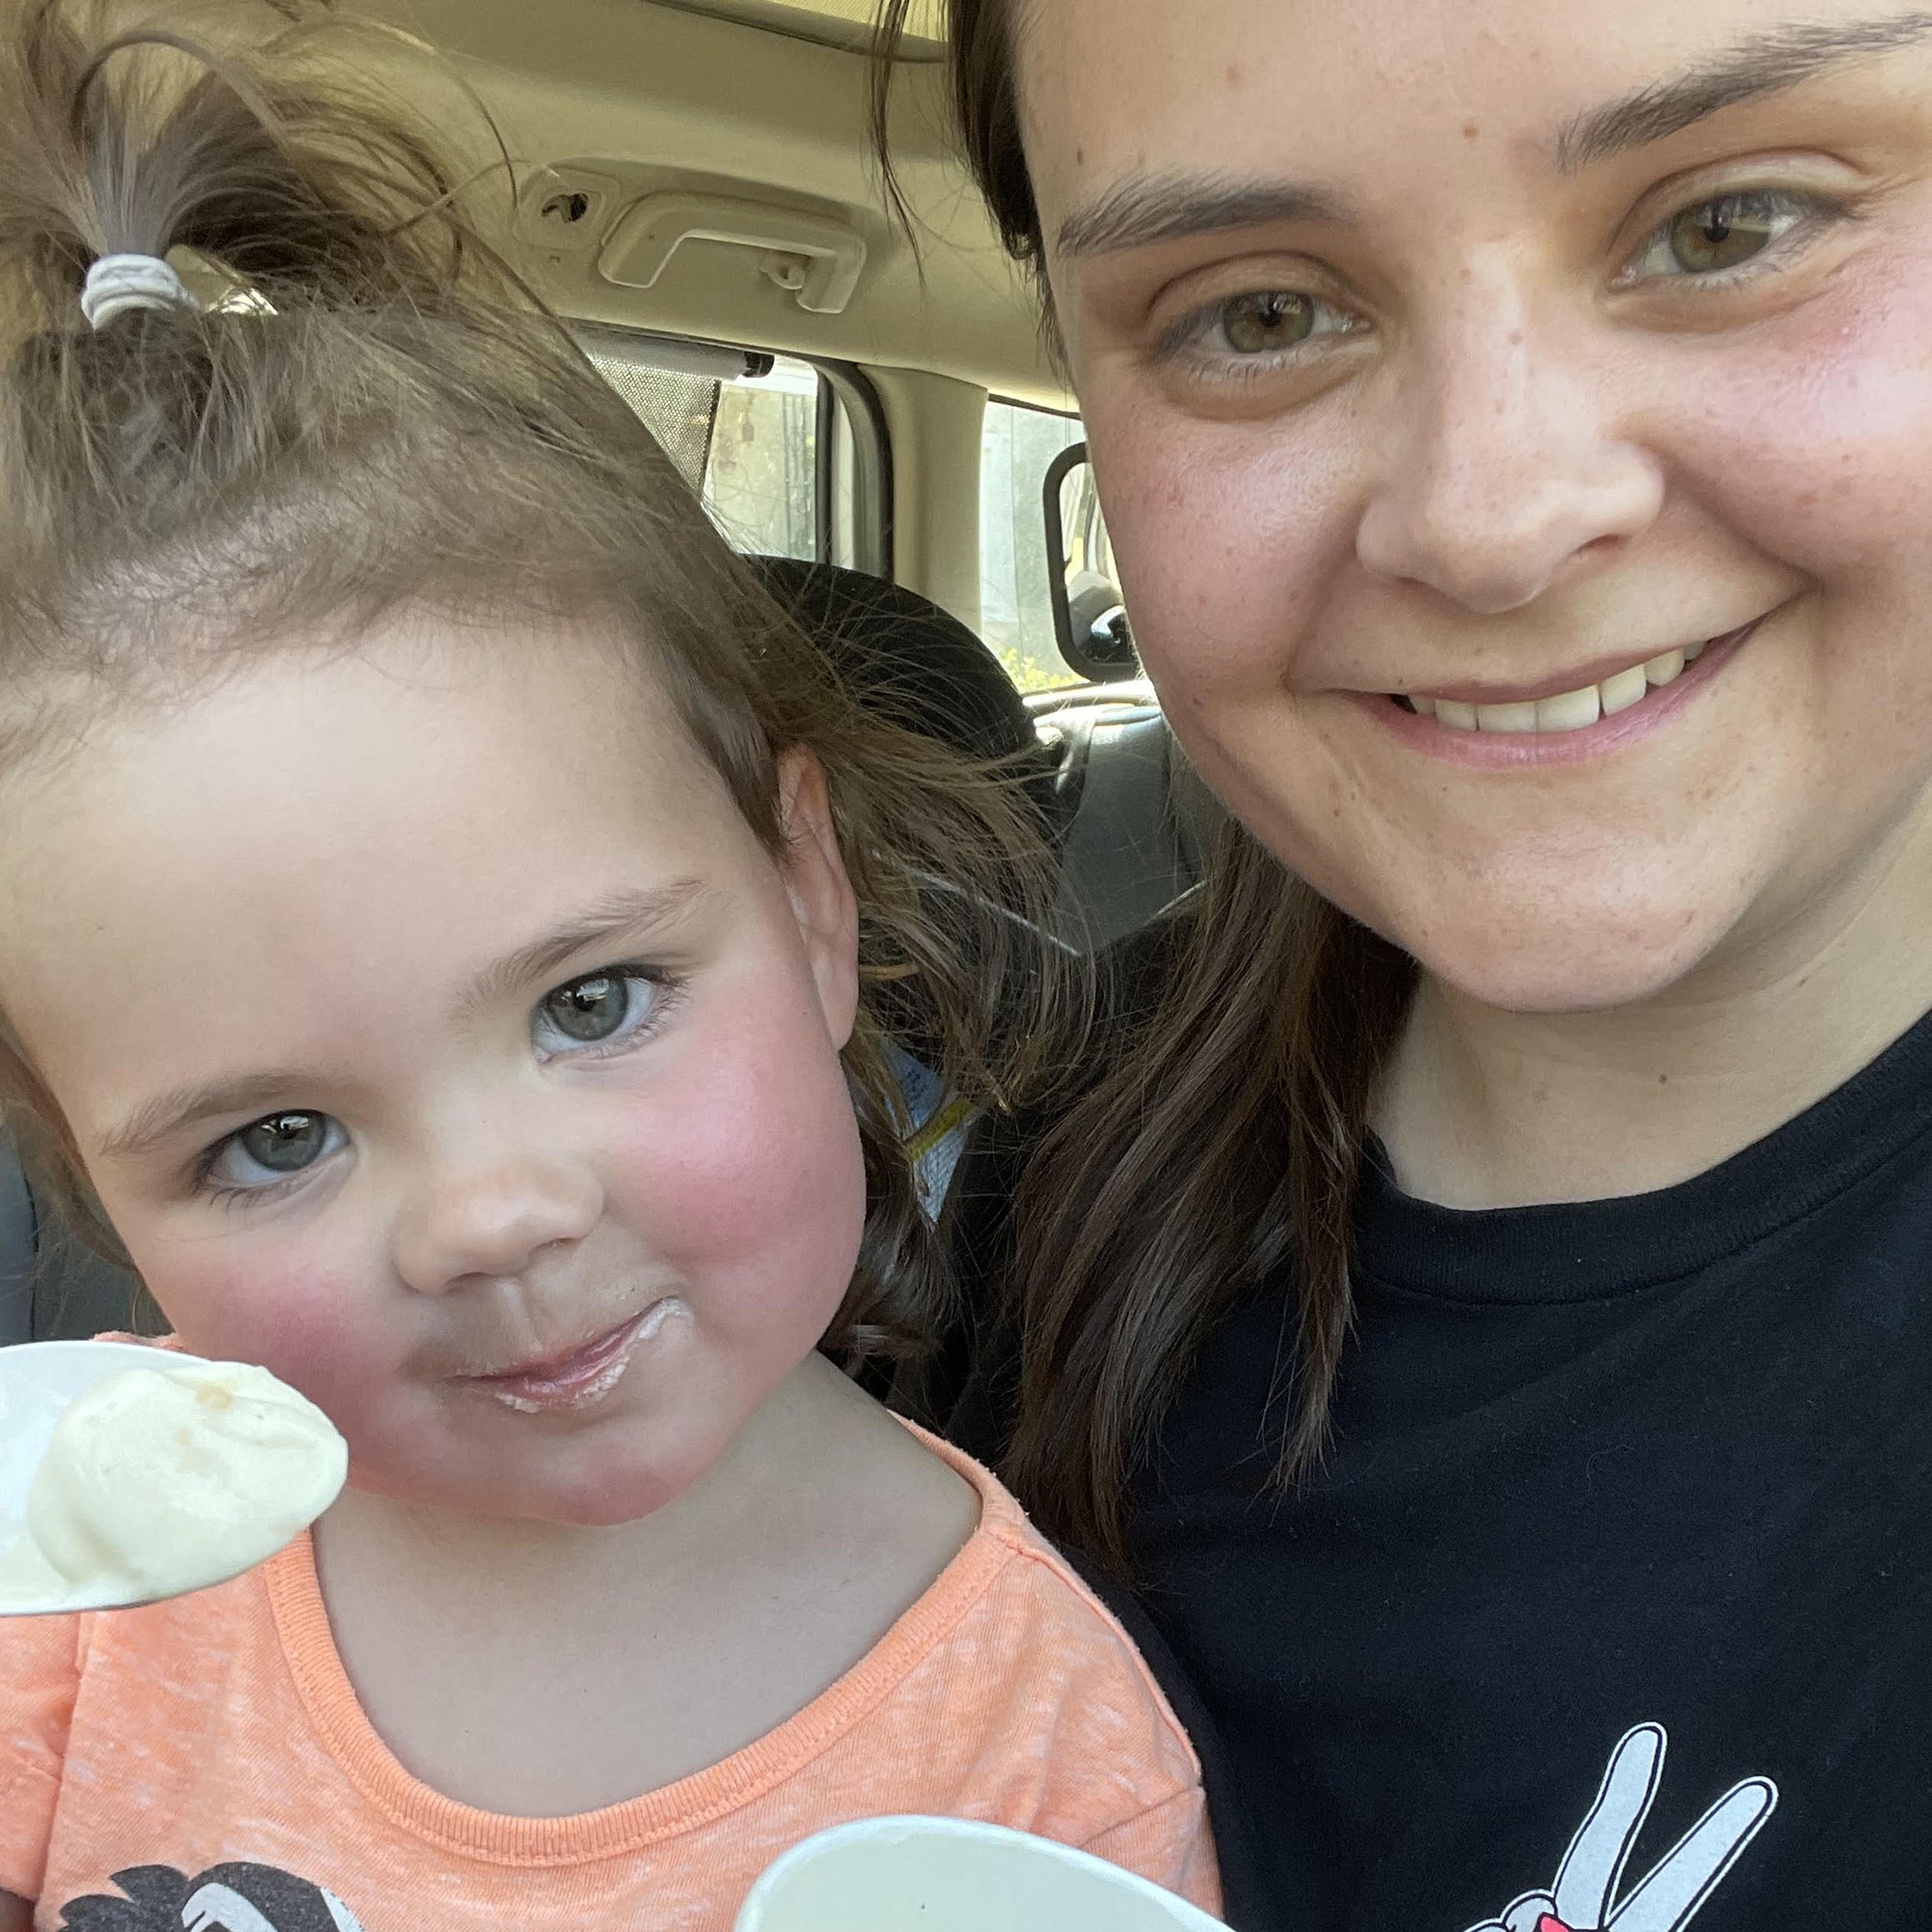 Amy and her daughter smile while eating ice cream